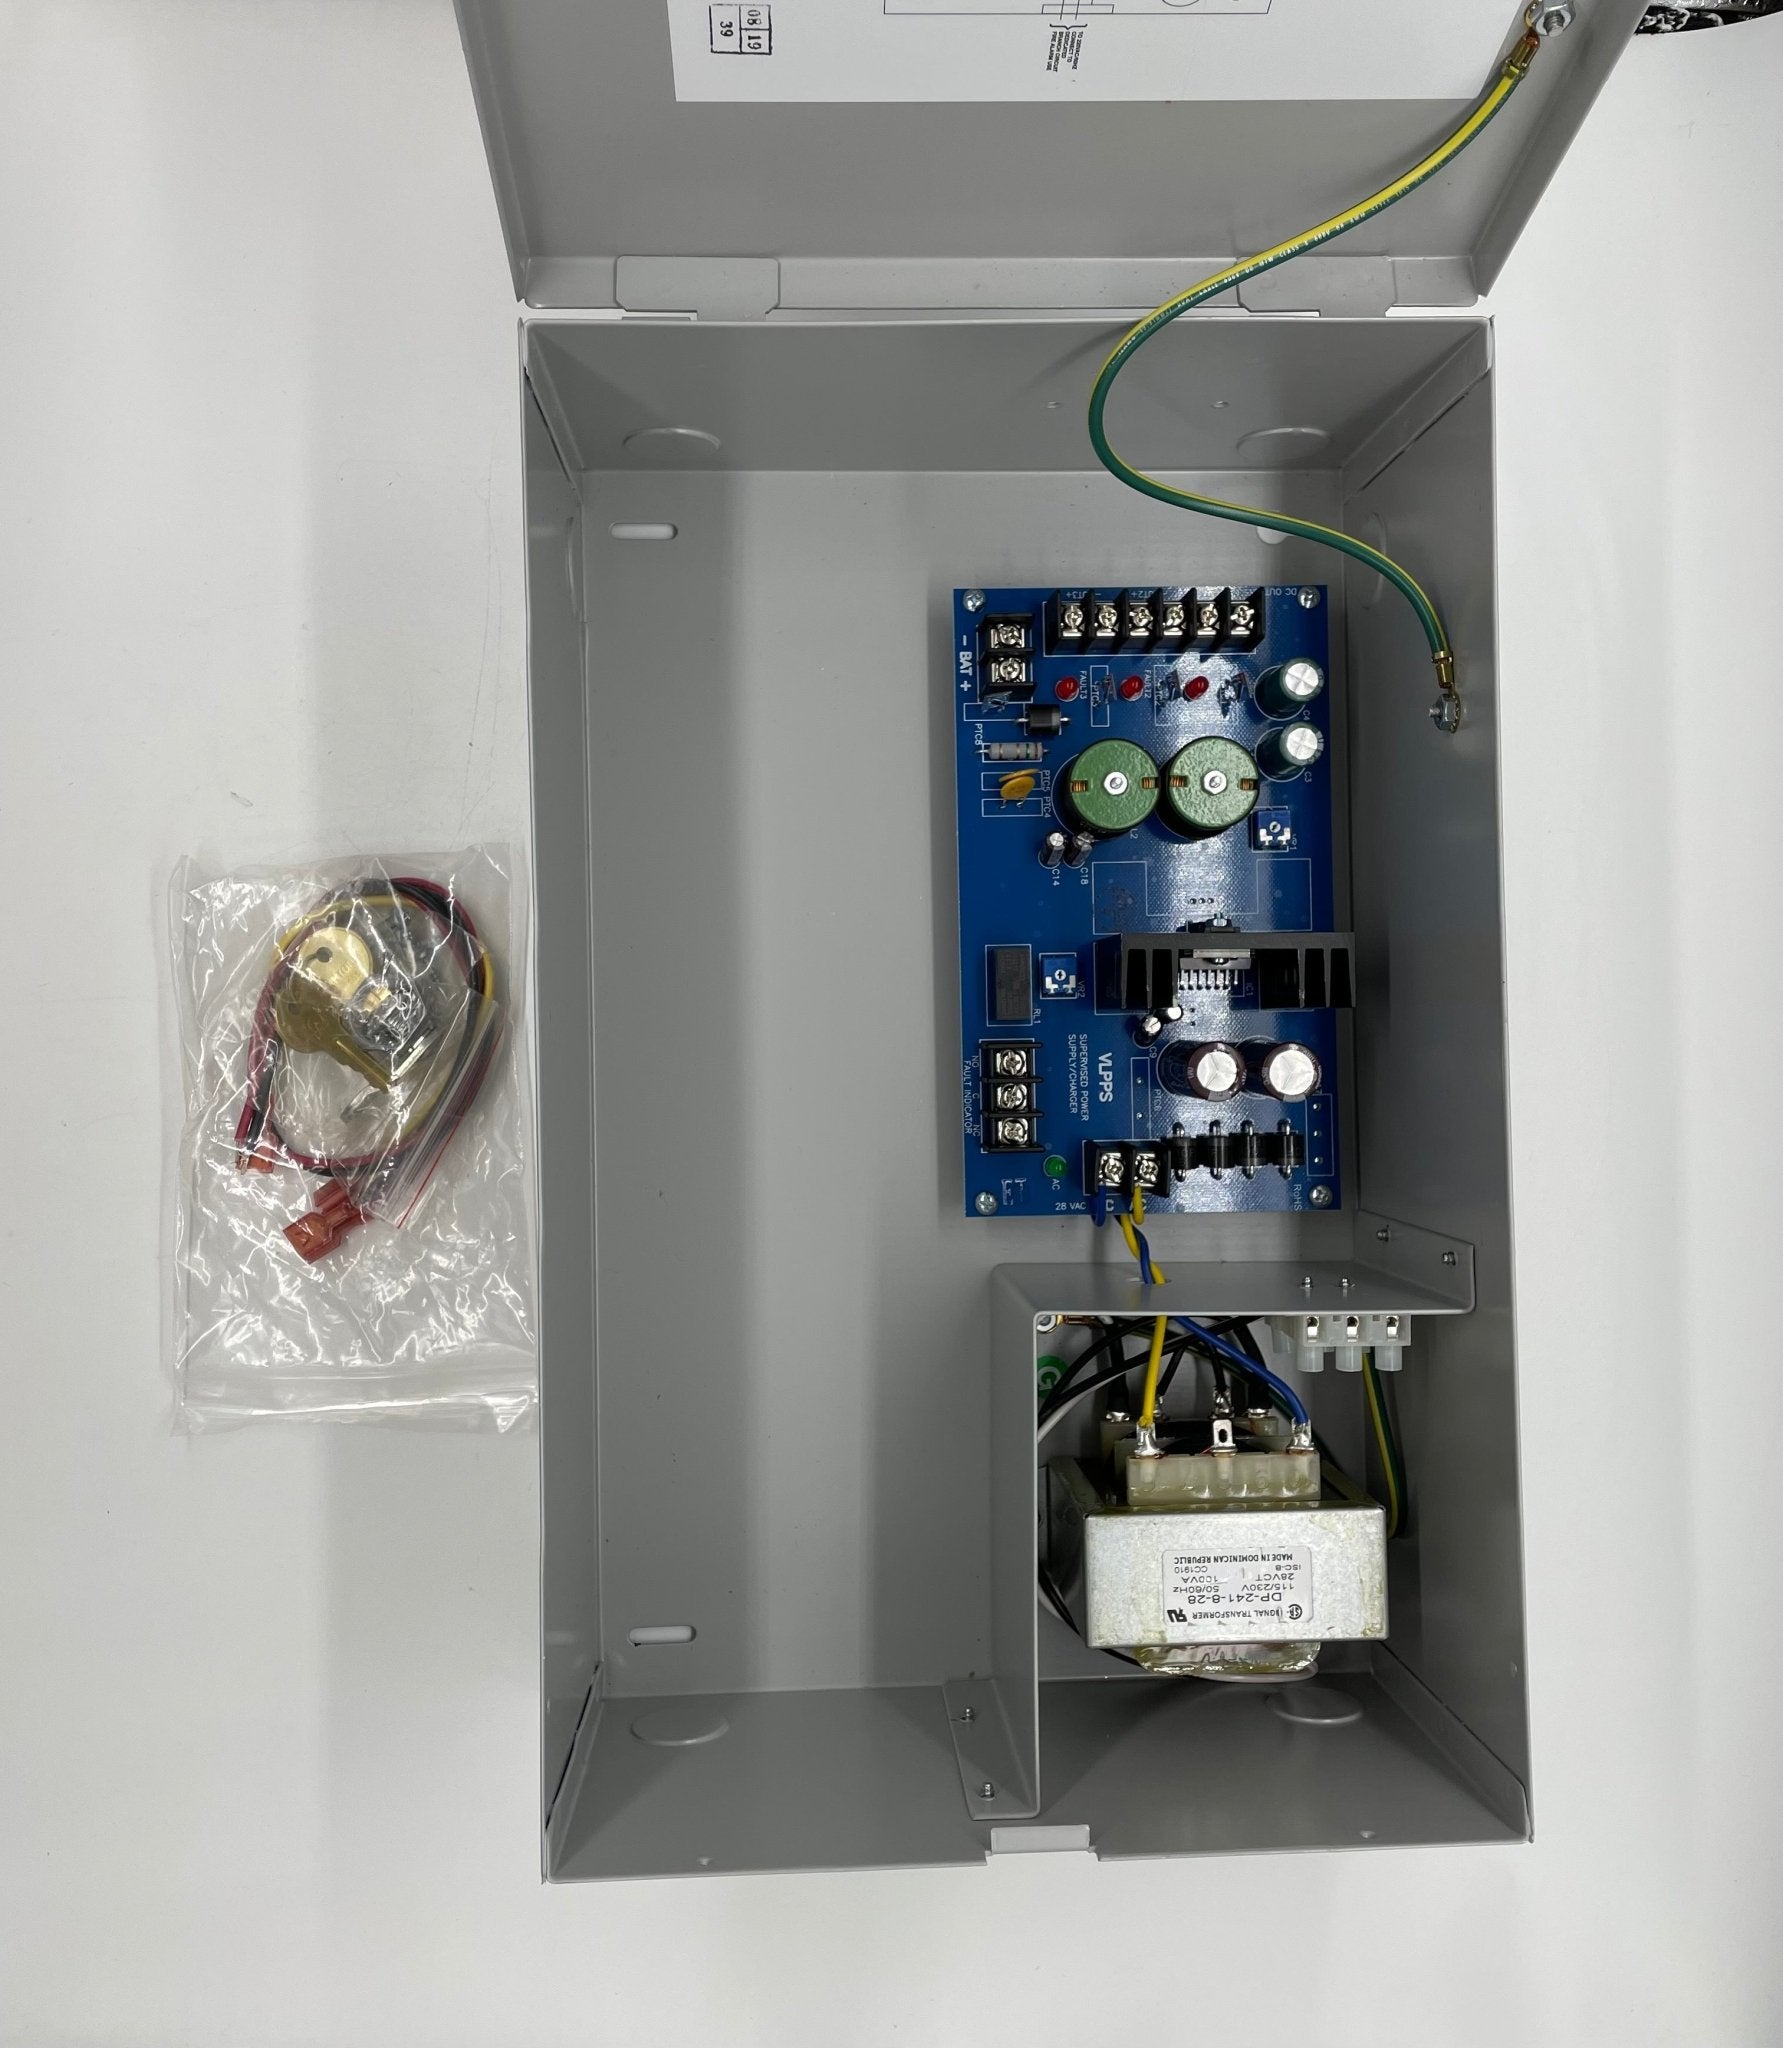 Siemens VPS-300US-220 - The Fire Alarm Supplier